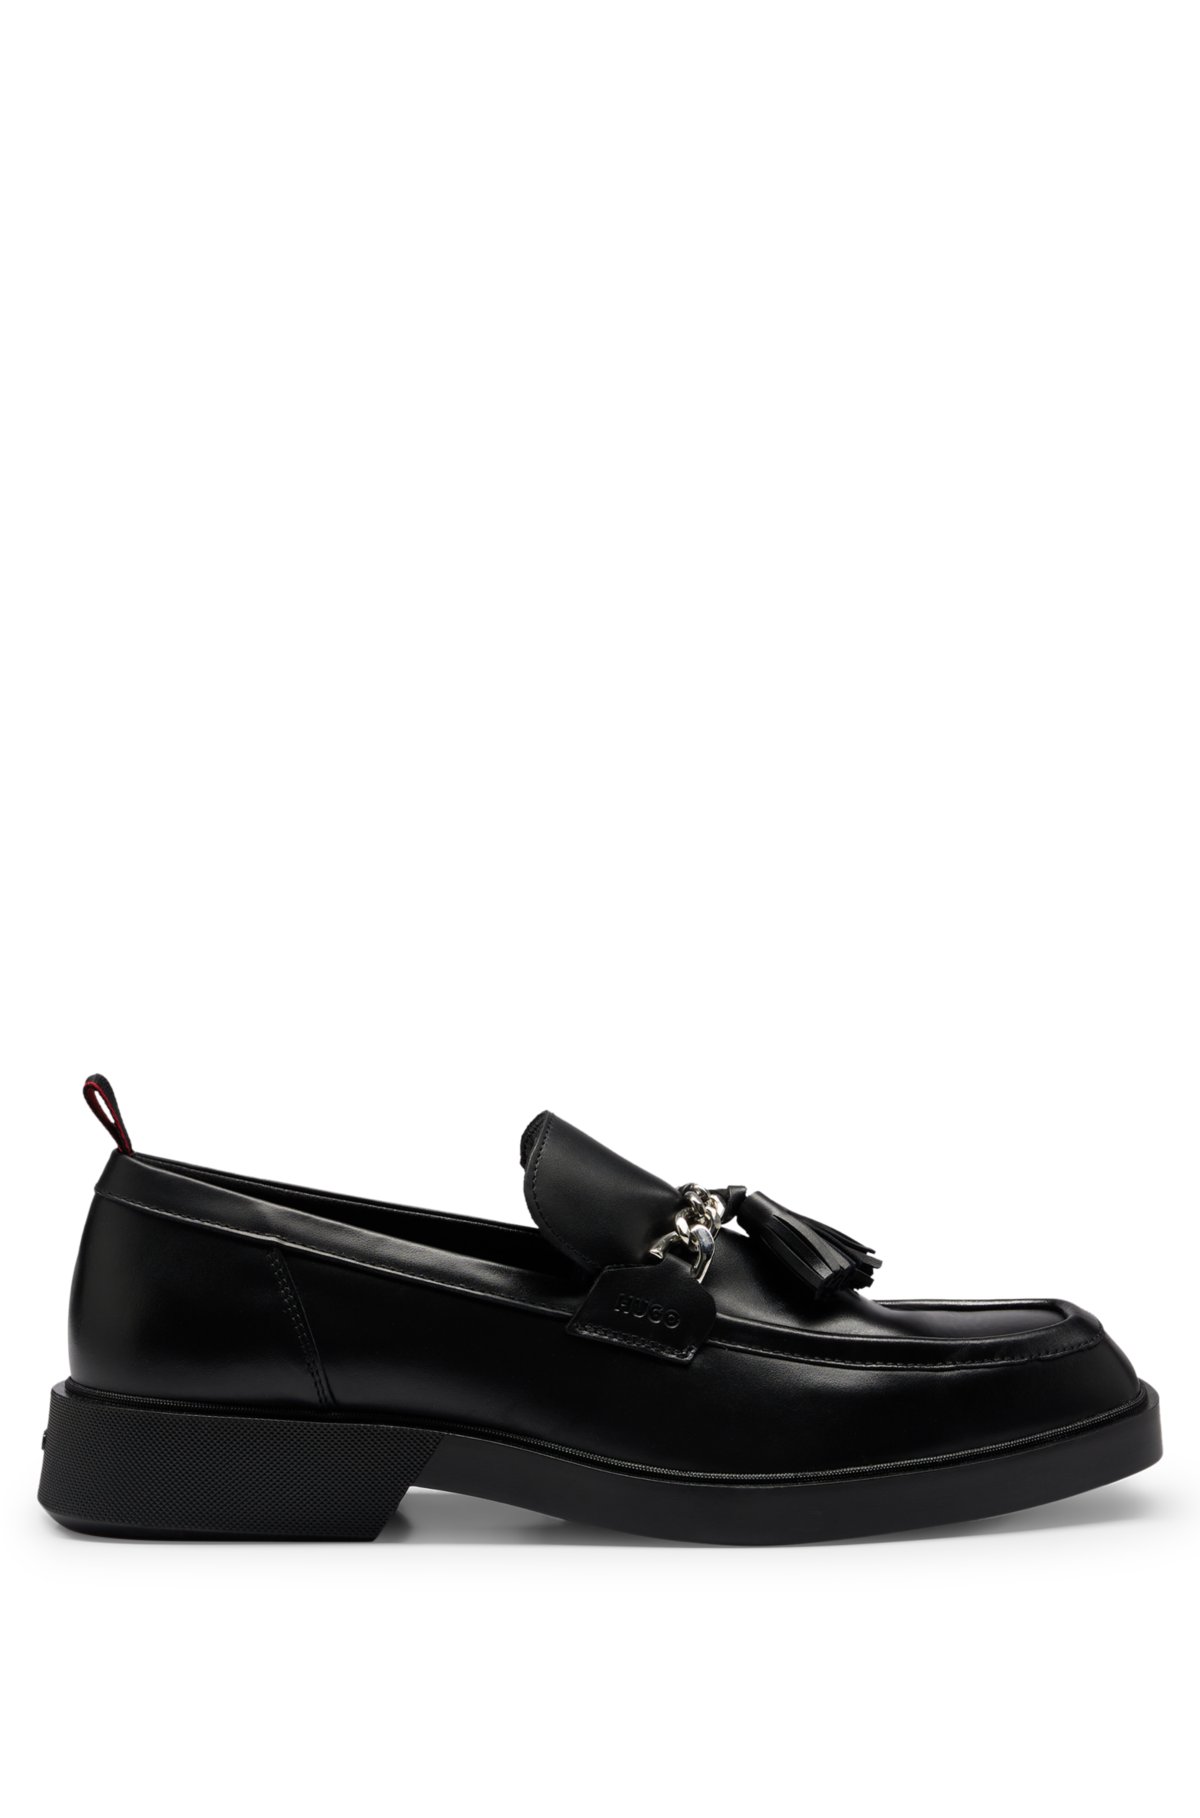 Leather slip-on moccasins with tassel and chain, Black